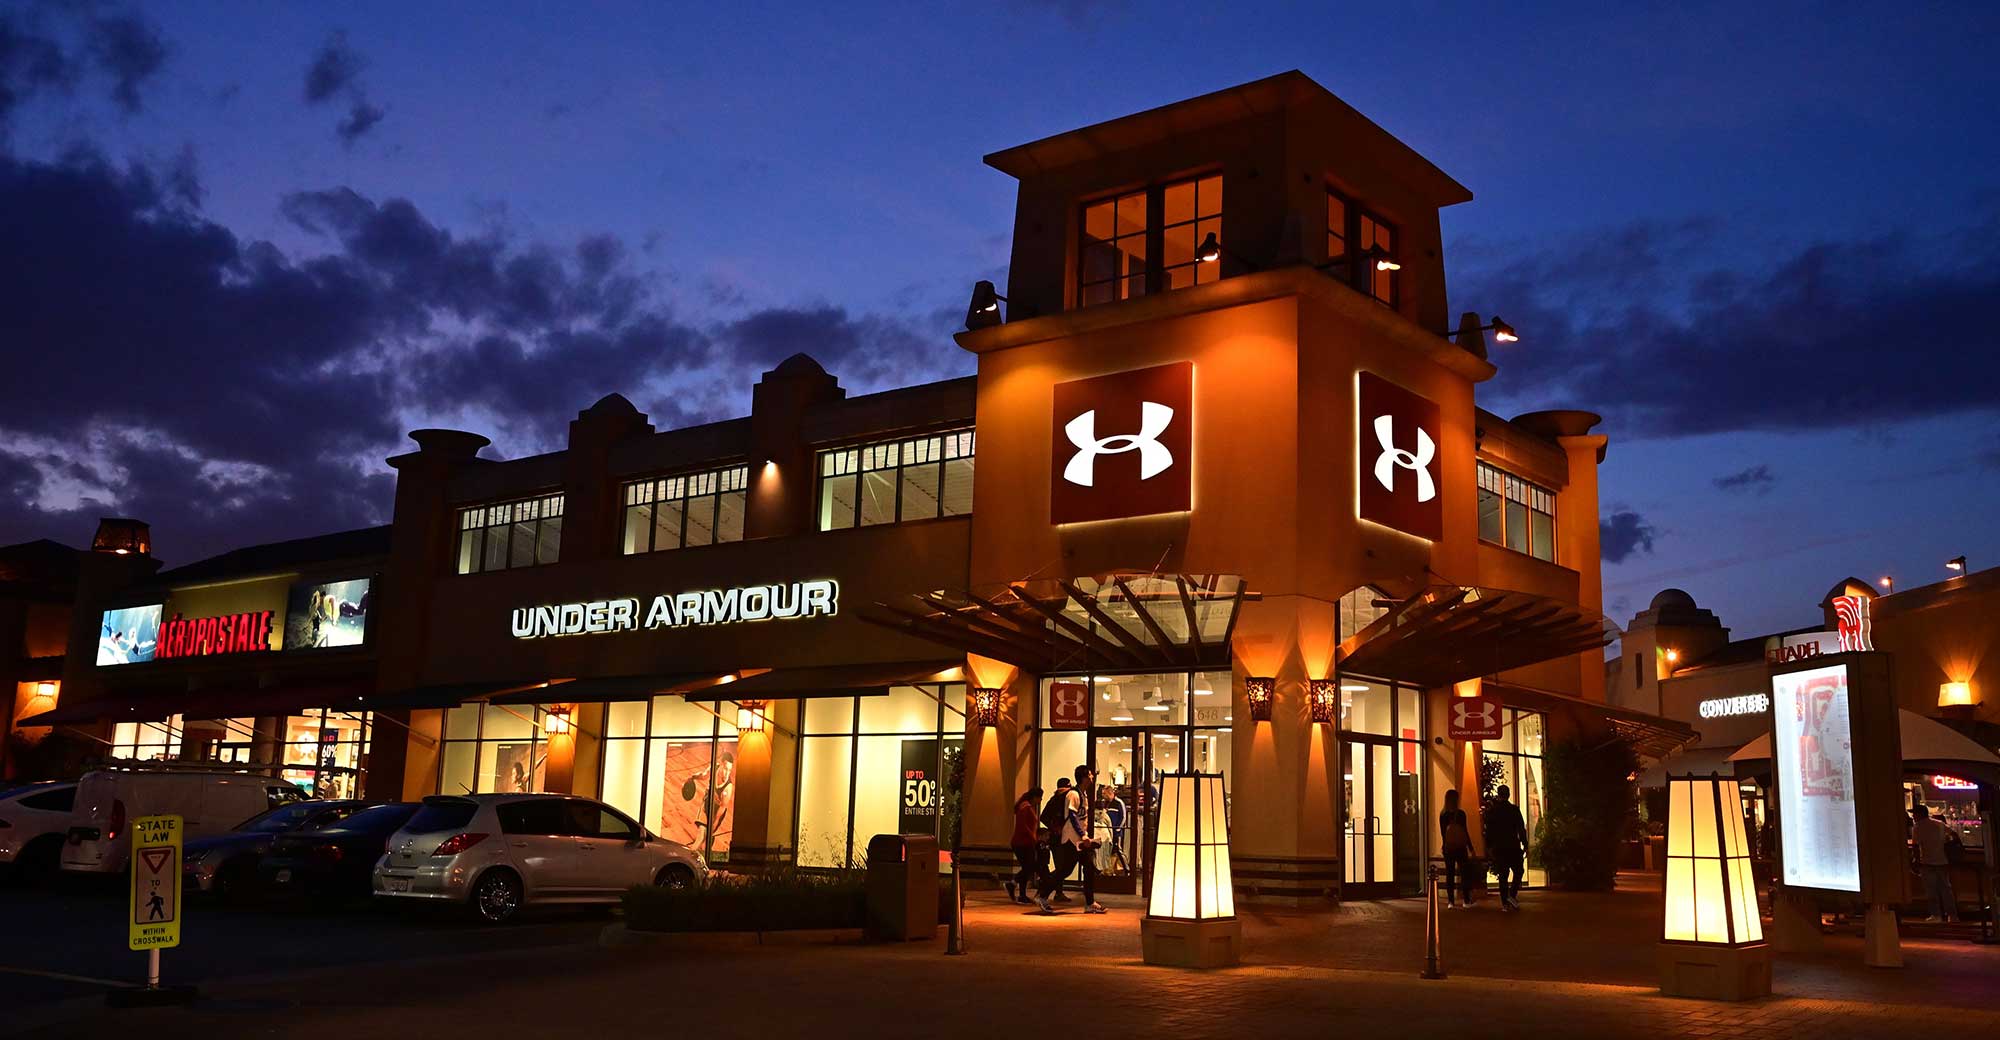 The rise of outlet centres